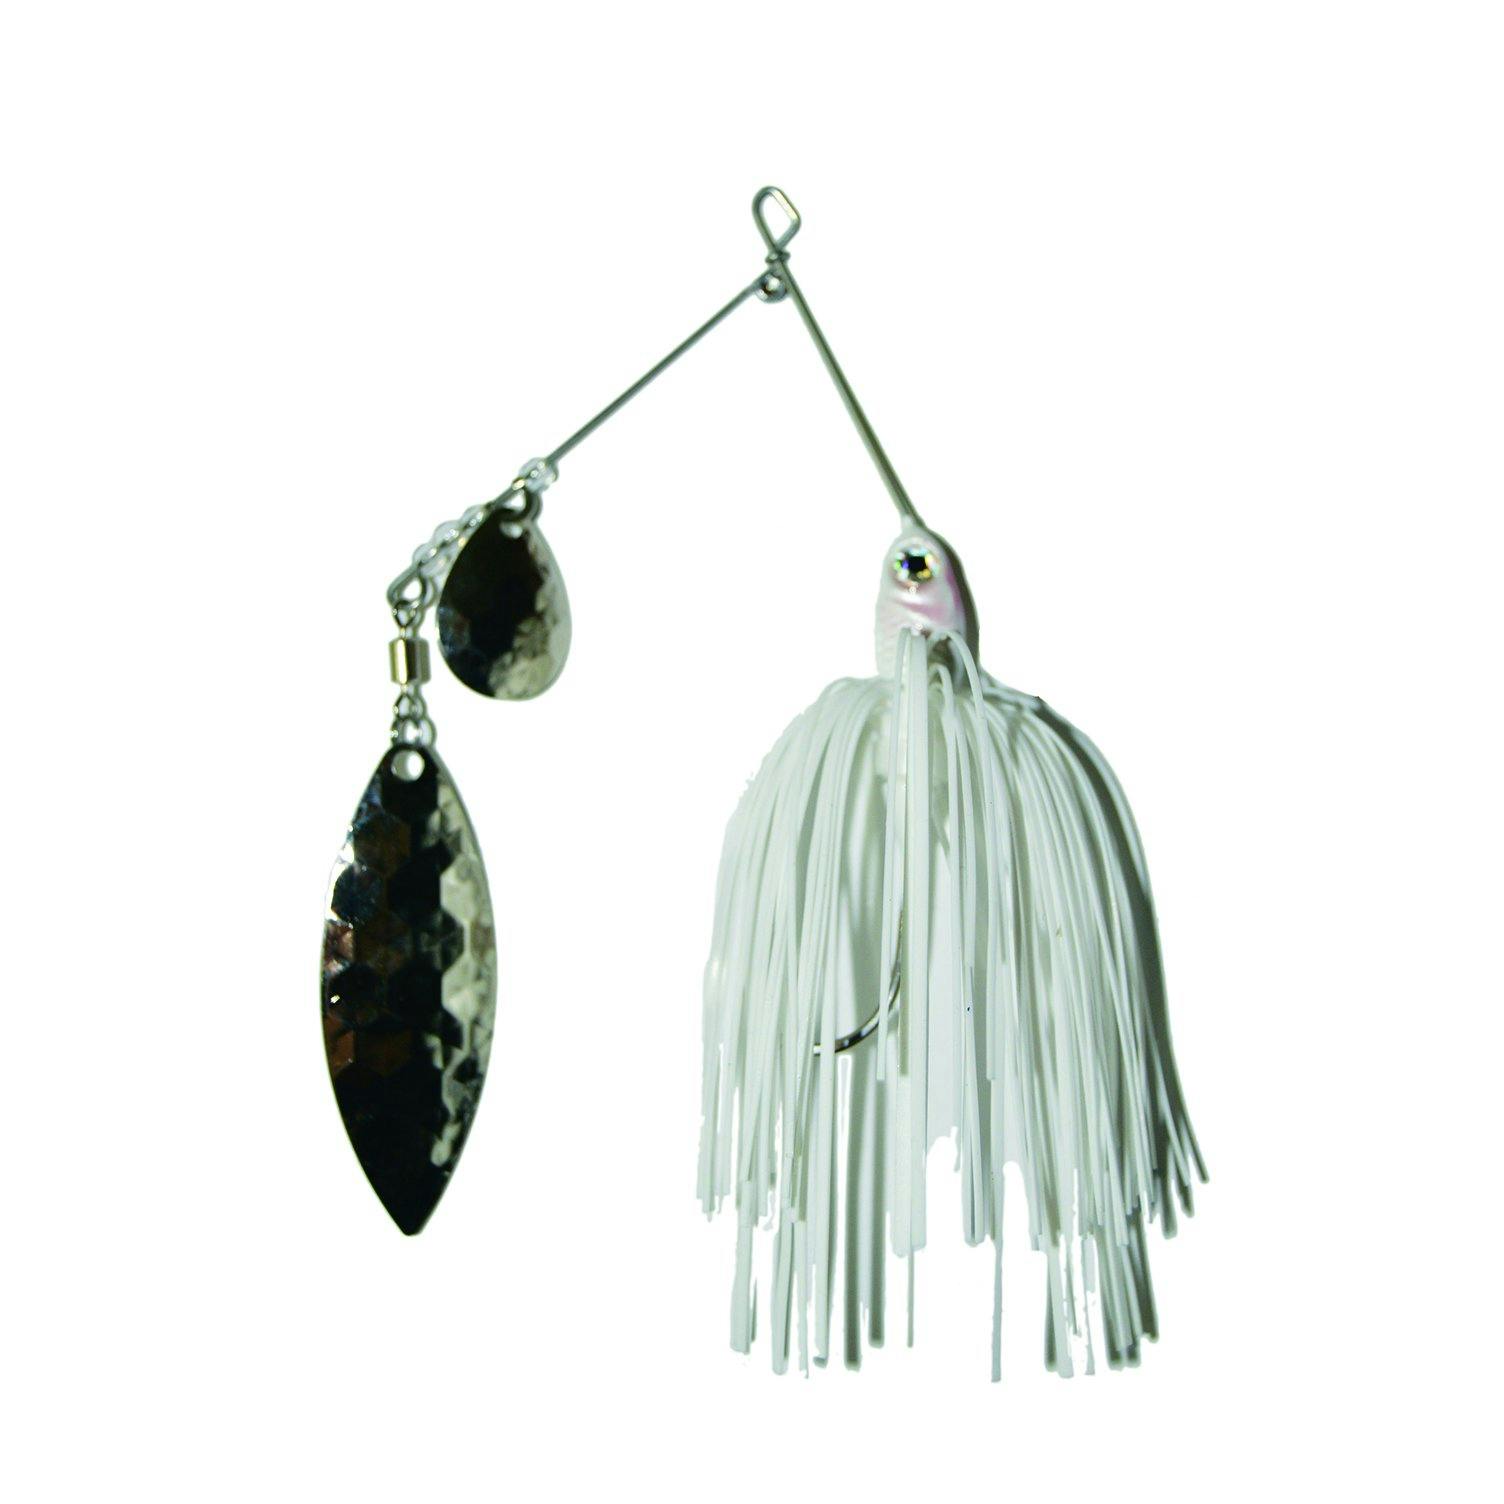 Mission Tackle Spinnerbait Tandem Spin - WHITE / 3/8 oz